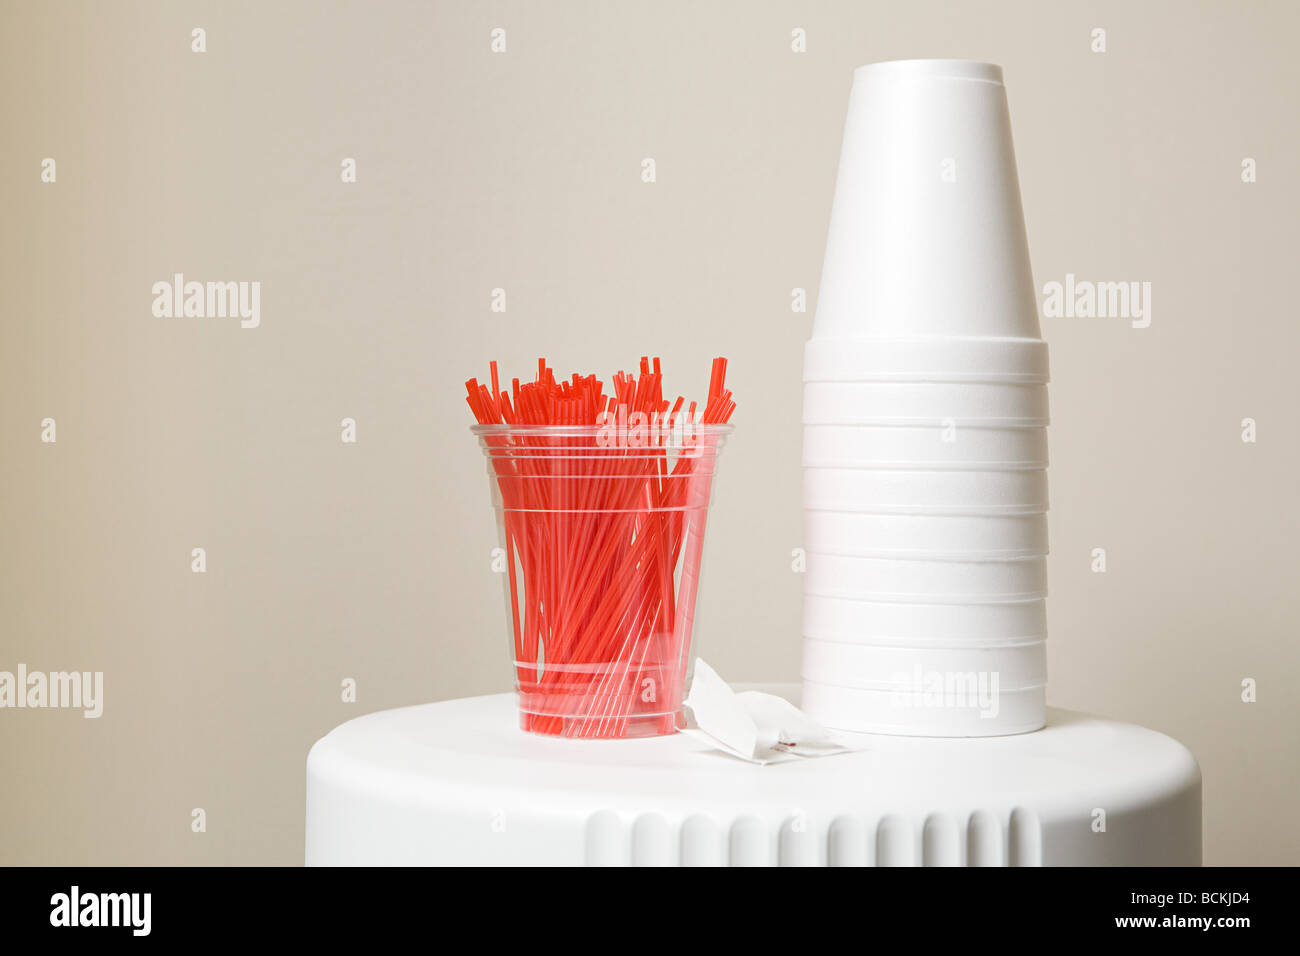 Polystyrene cups and plastic stirrers on top of coffee machine Stock Photo